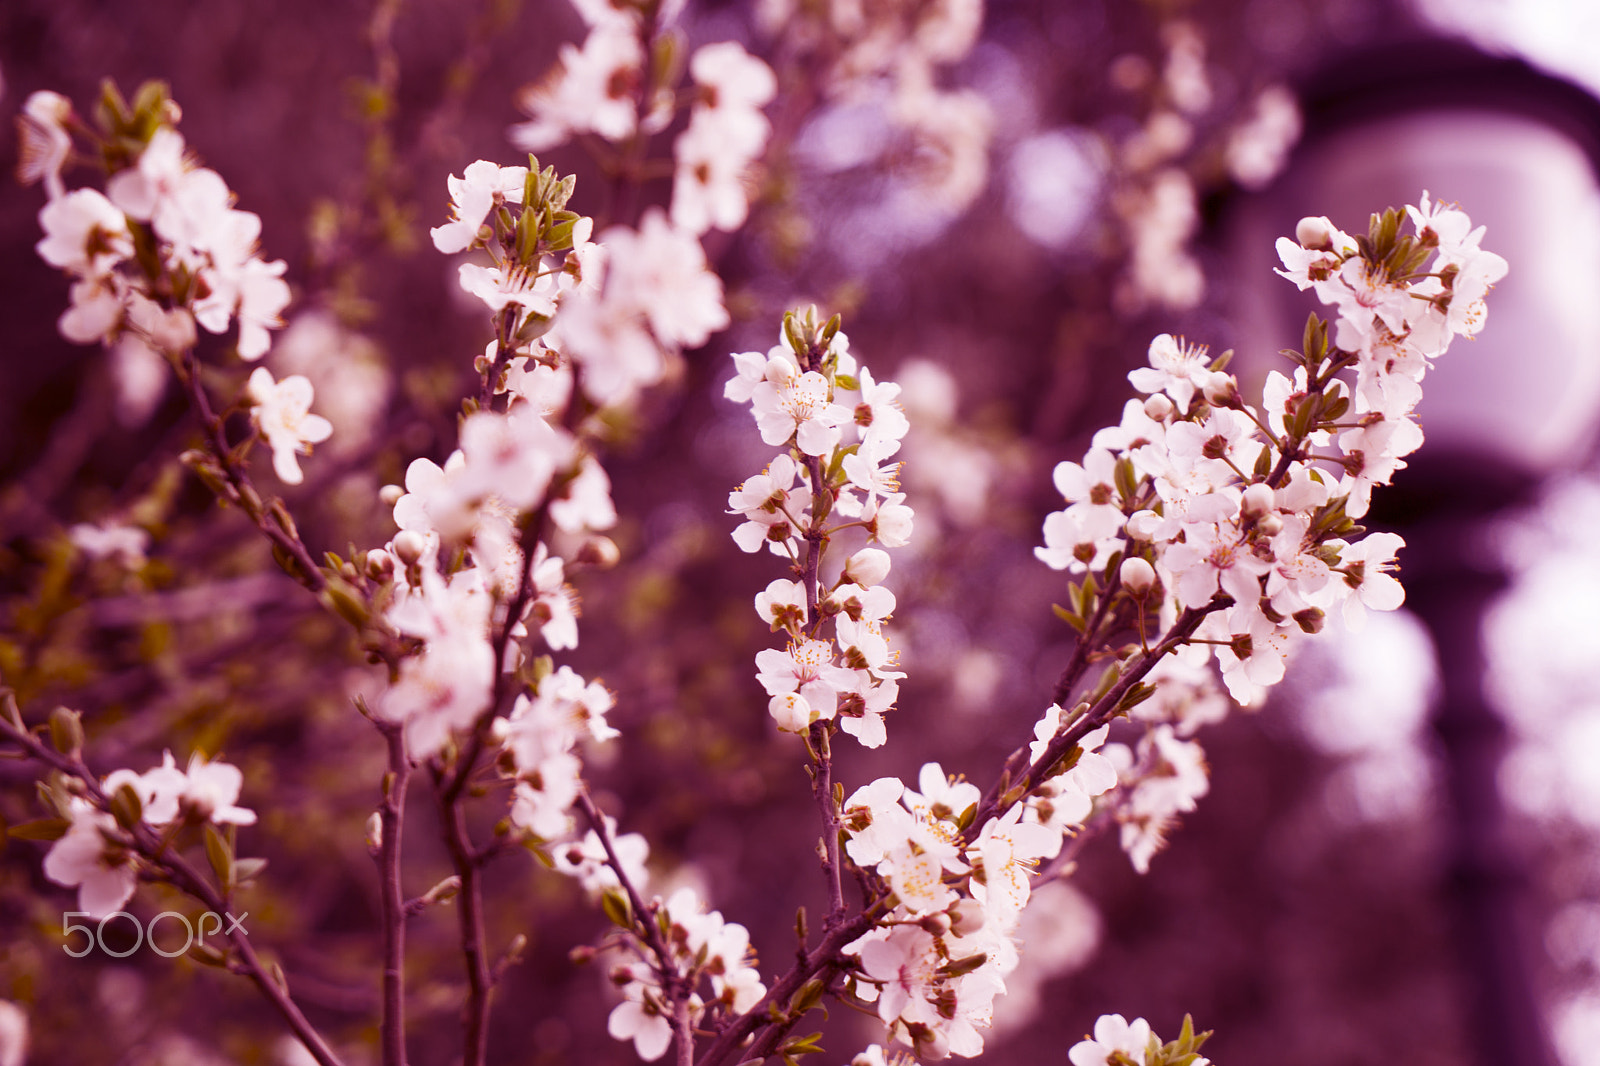 Sony a7 sample photo. Apricot blossom flowers in spring. tone photography